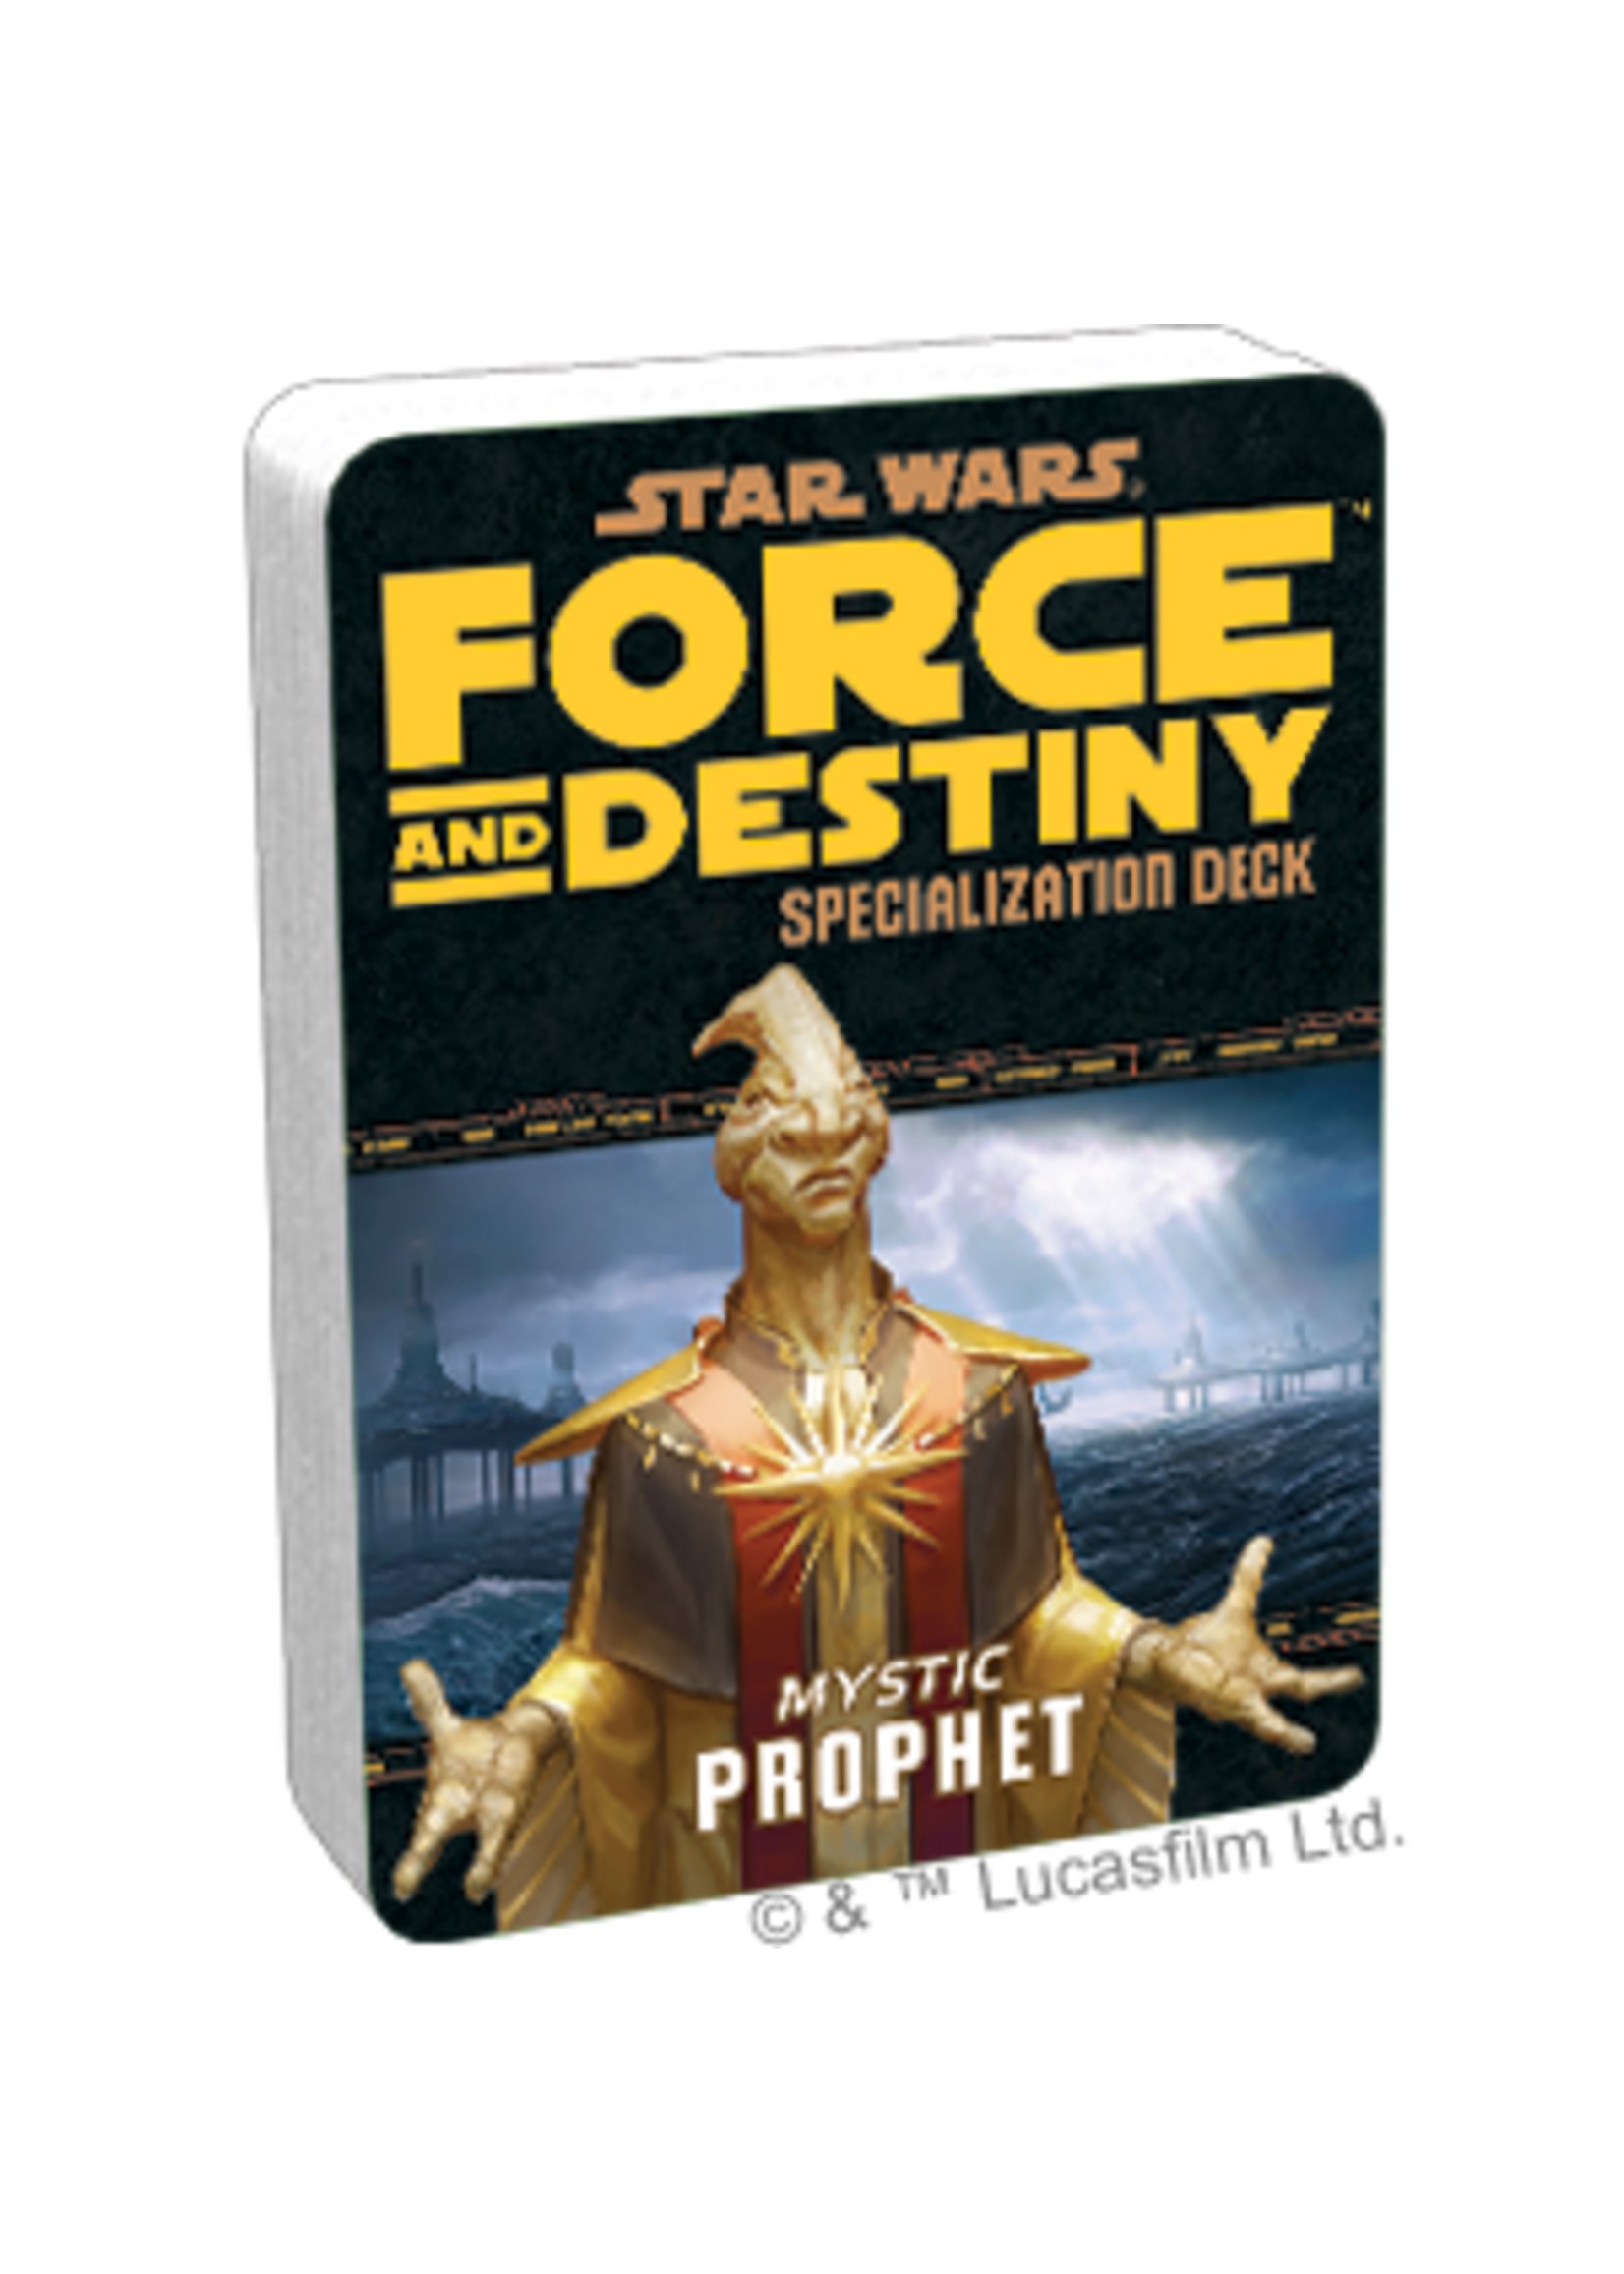 Star Wars Force and Destiny Mystic Prophet Specialization